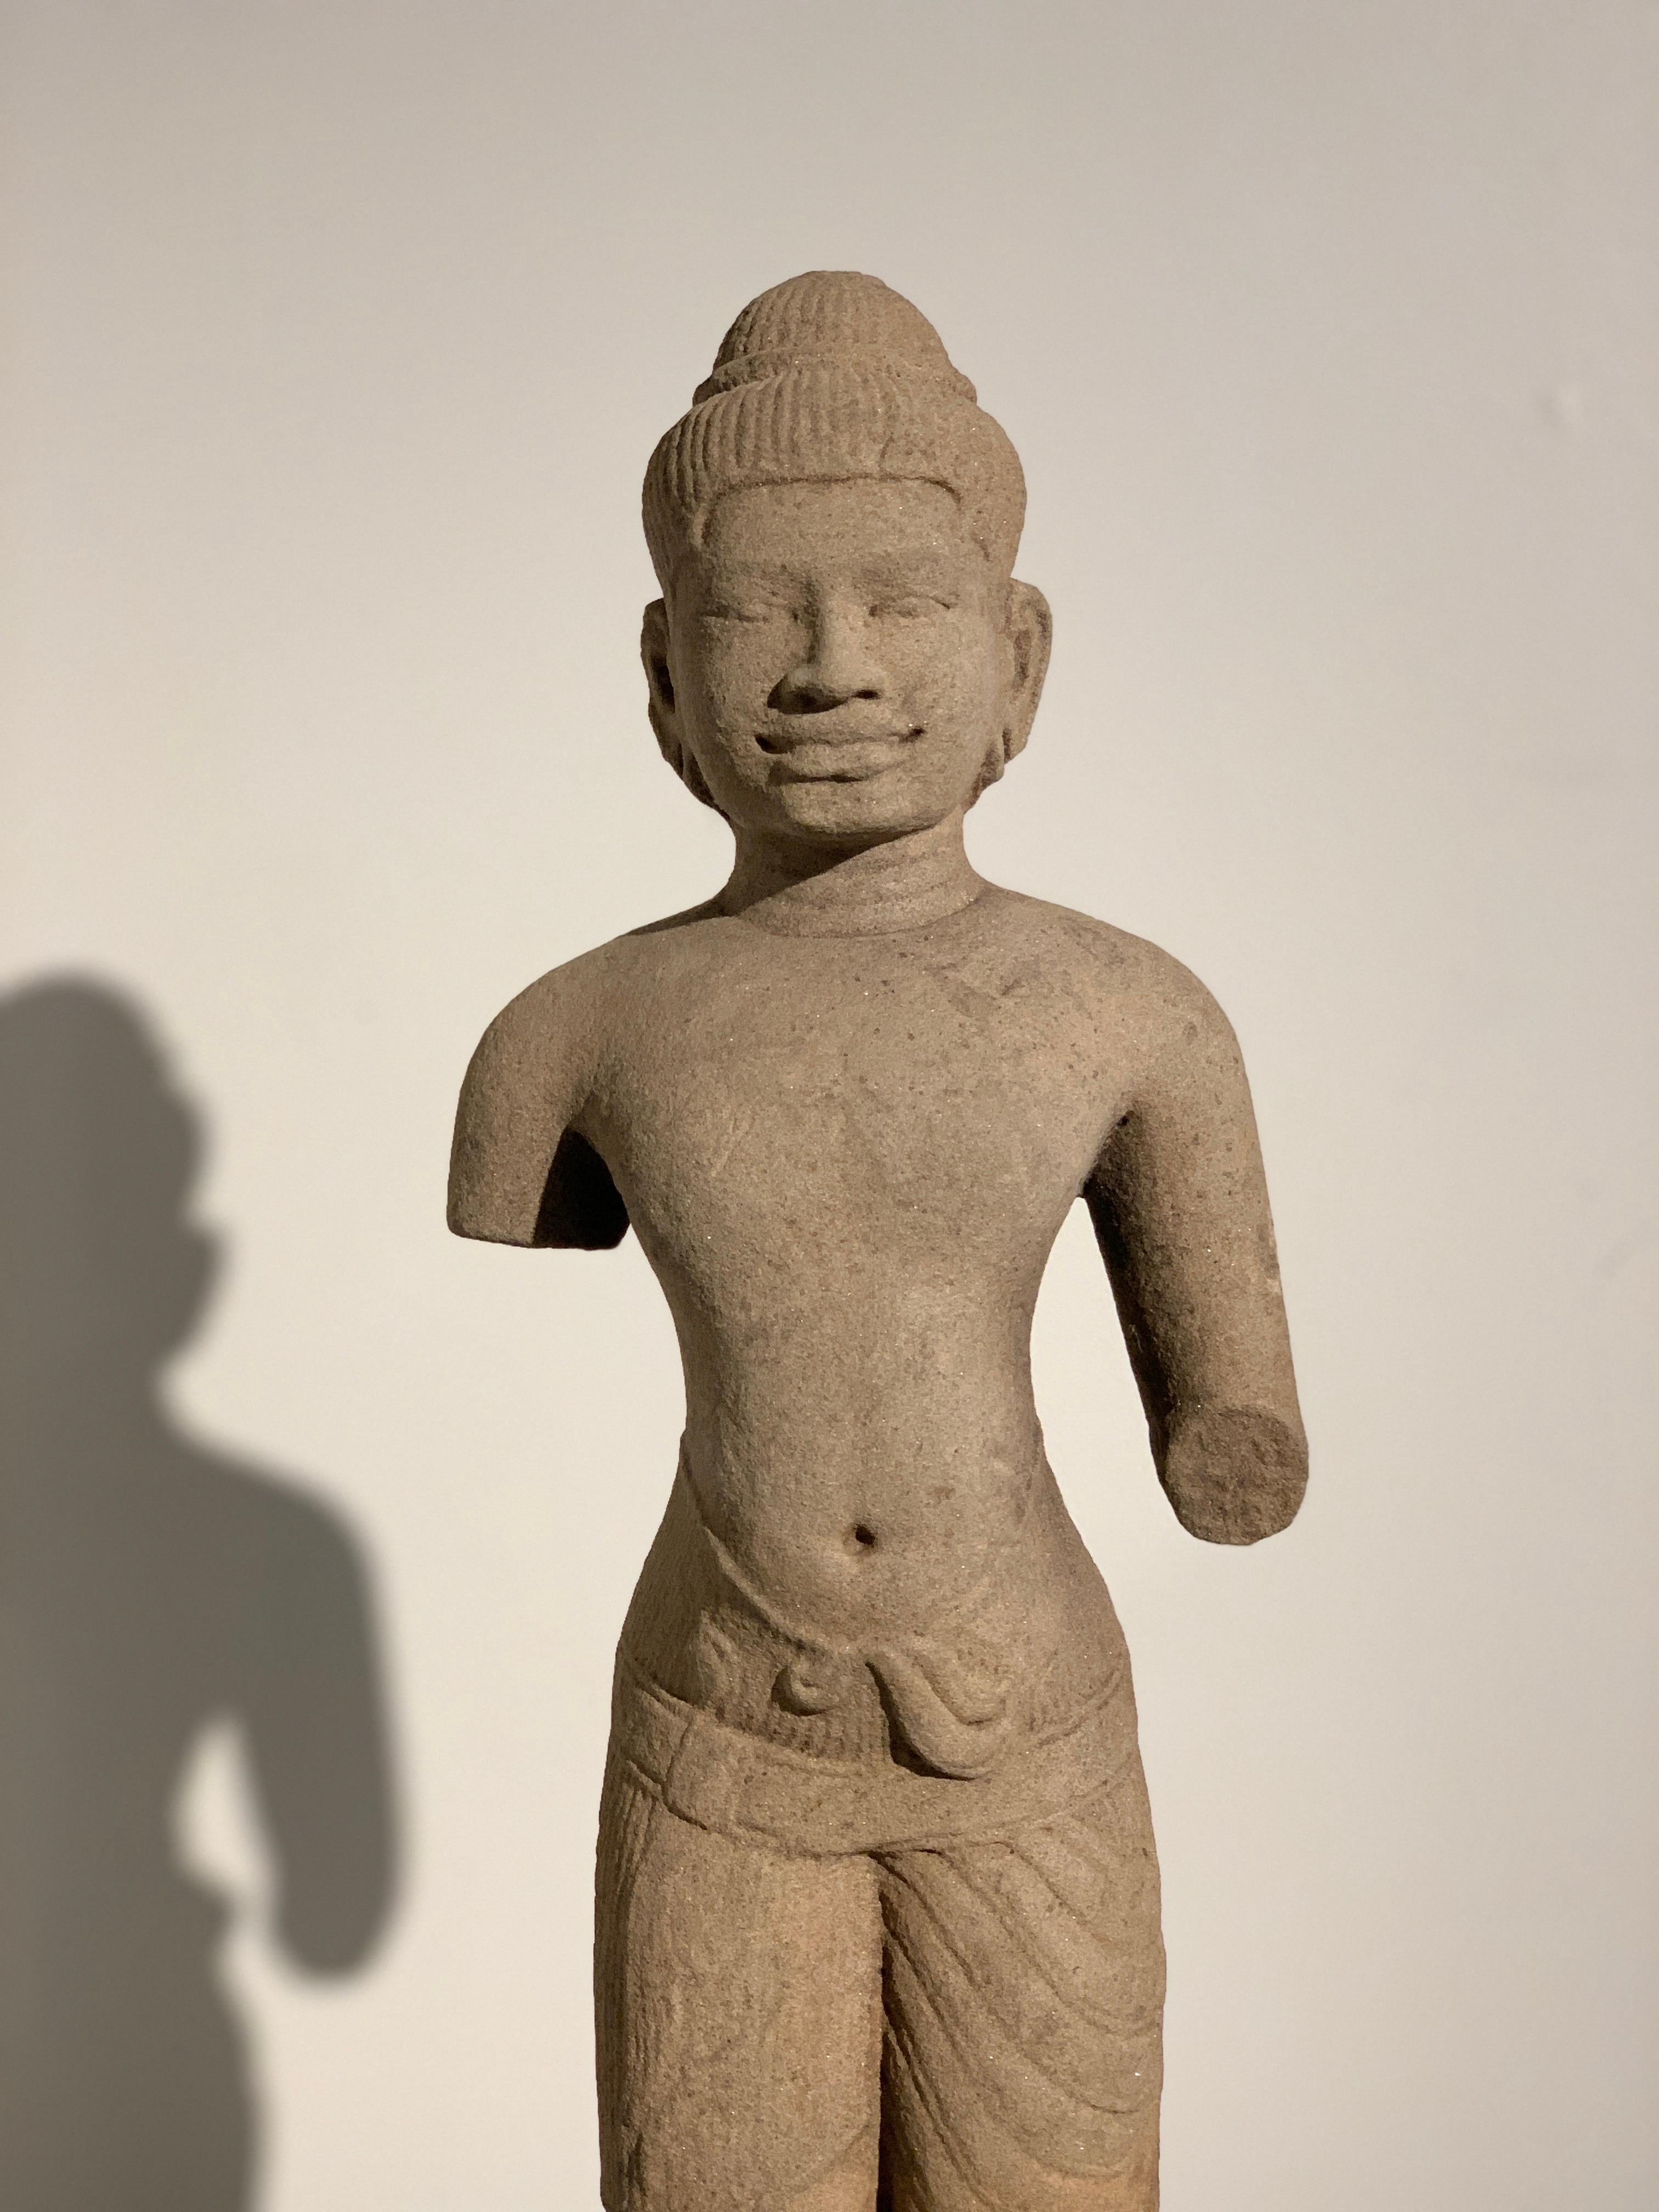 Khmer Carved Sandstone Male Deity, Style of the Baphoun, 11th Century In Good Condition For Sale In Austin, TX